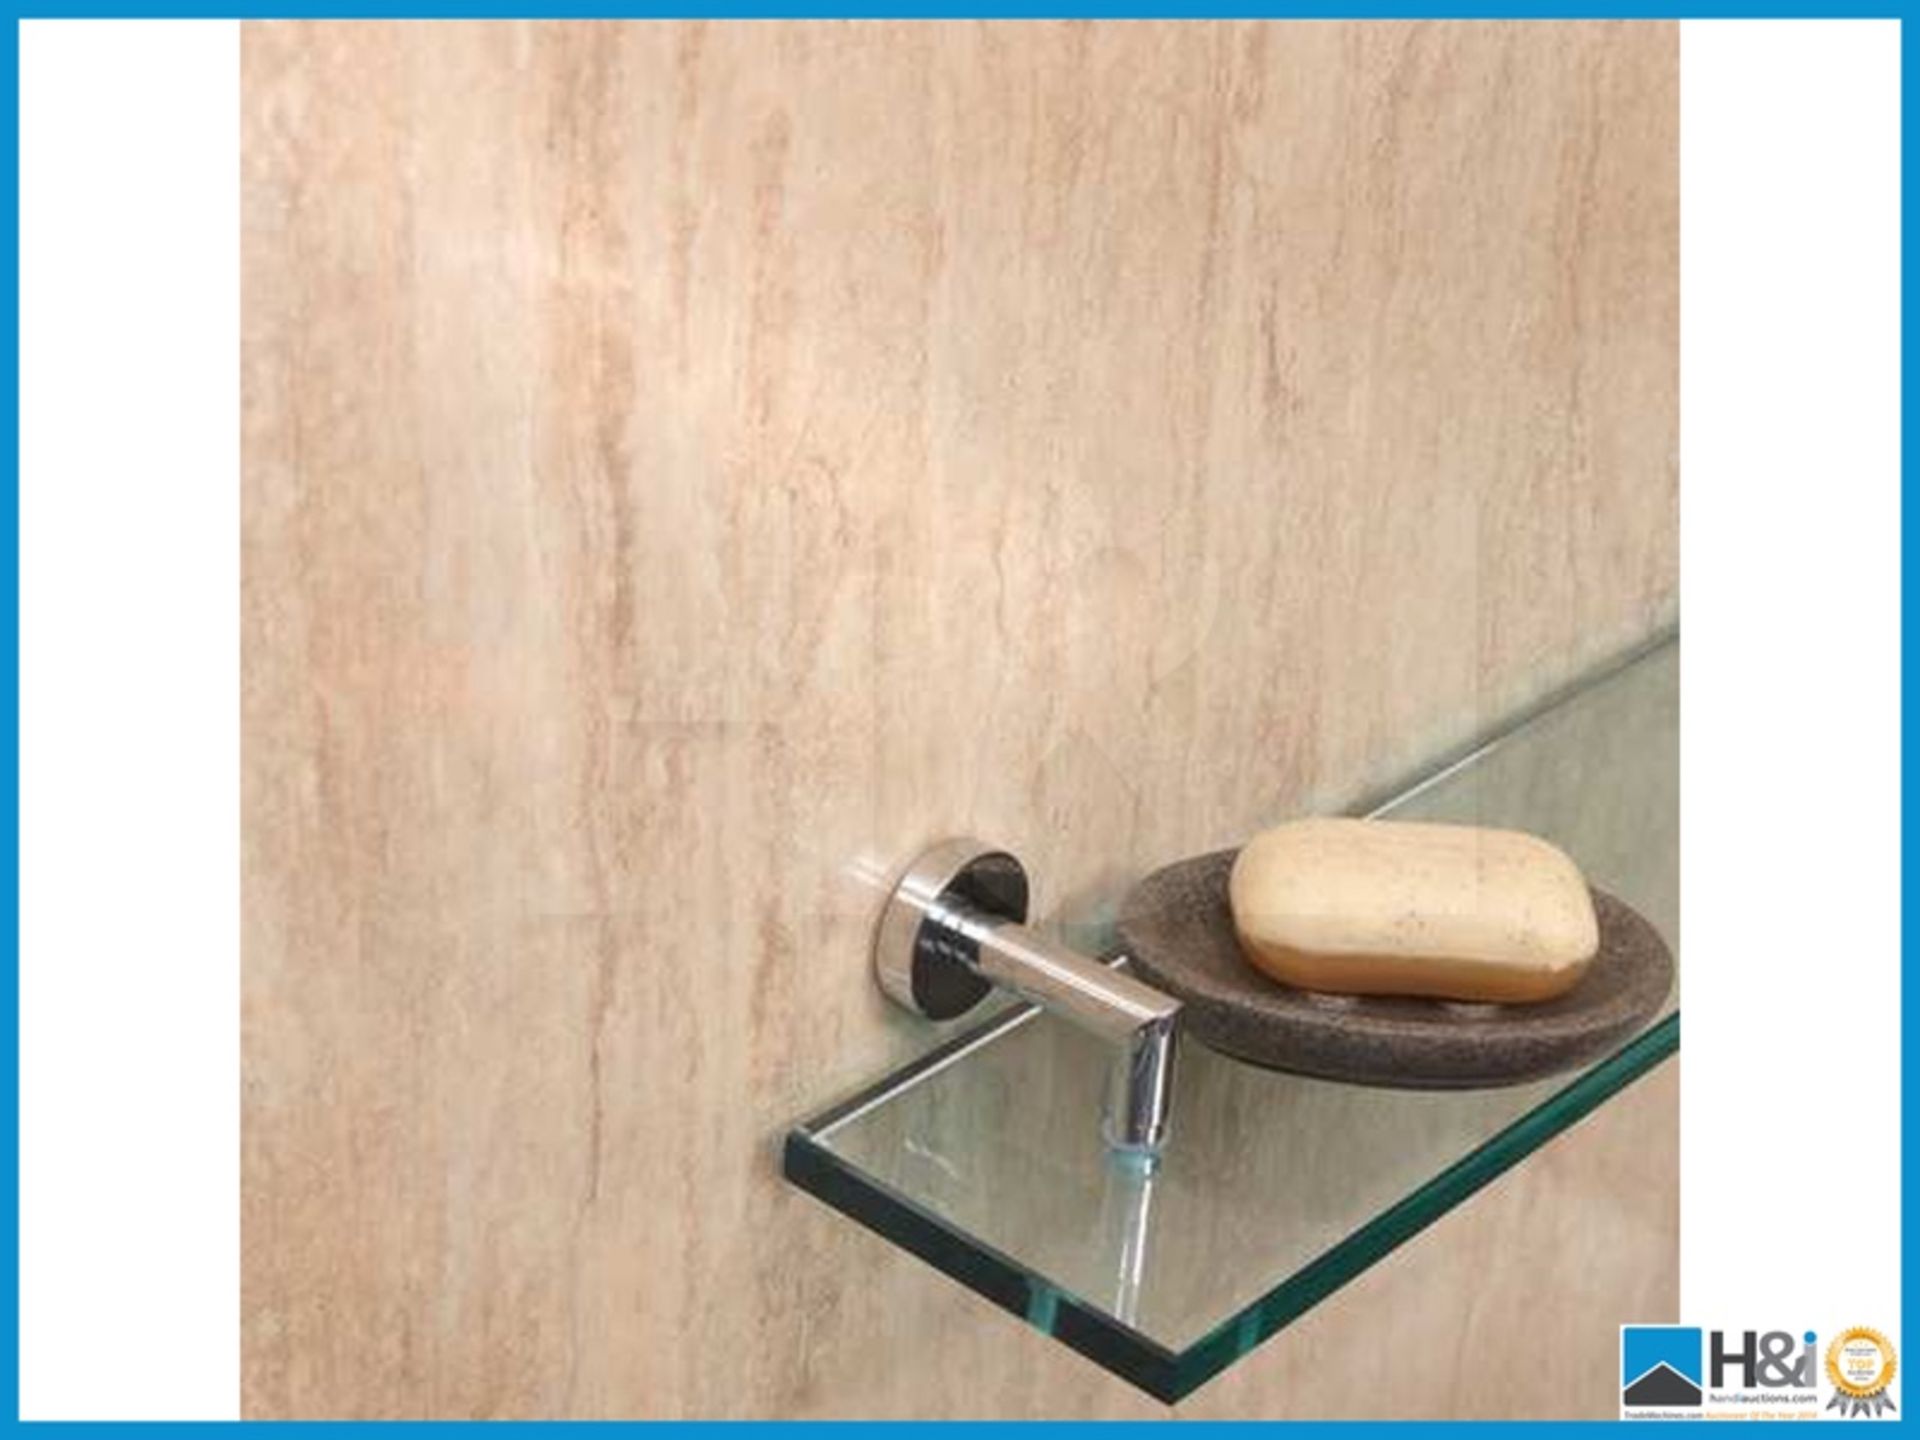 Designer travertine wet room panel 1000x2400. New and boxed. Suggested manufacturers selling